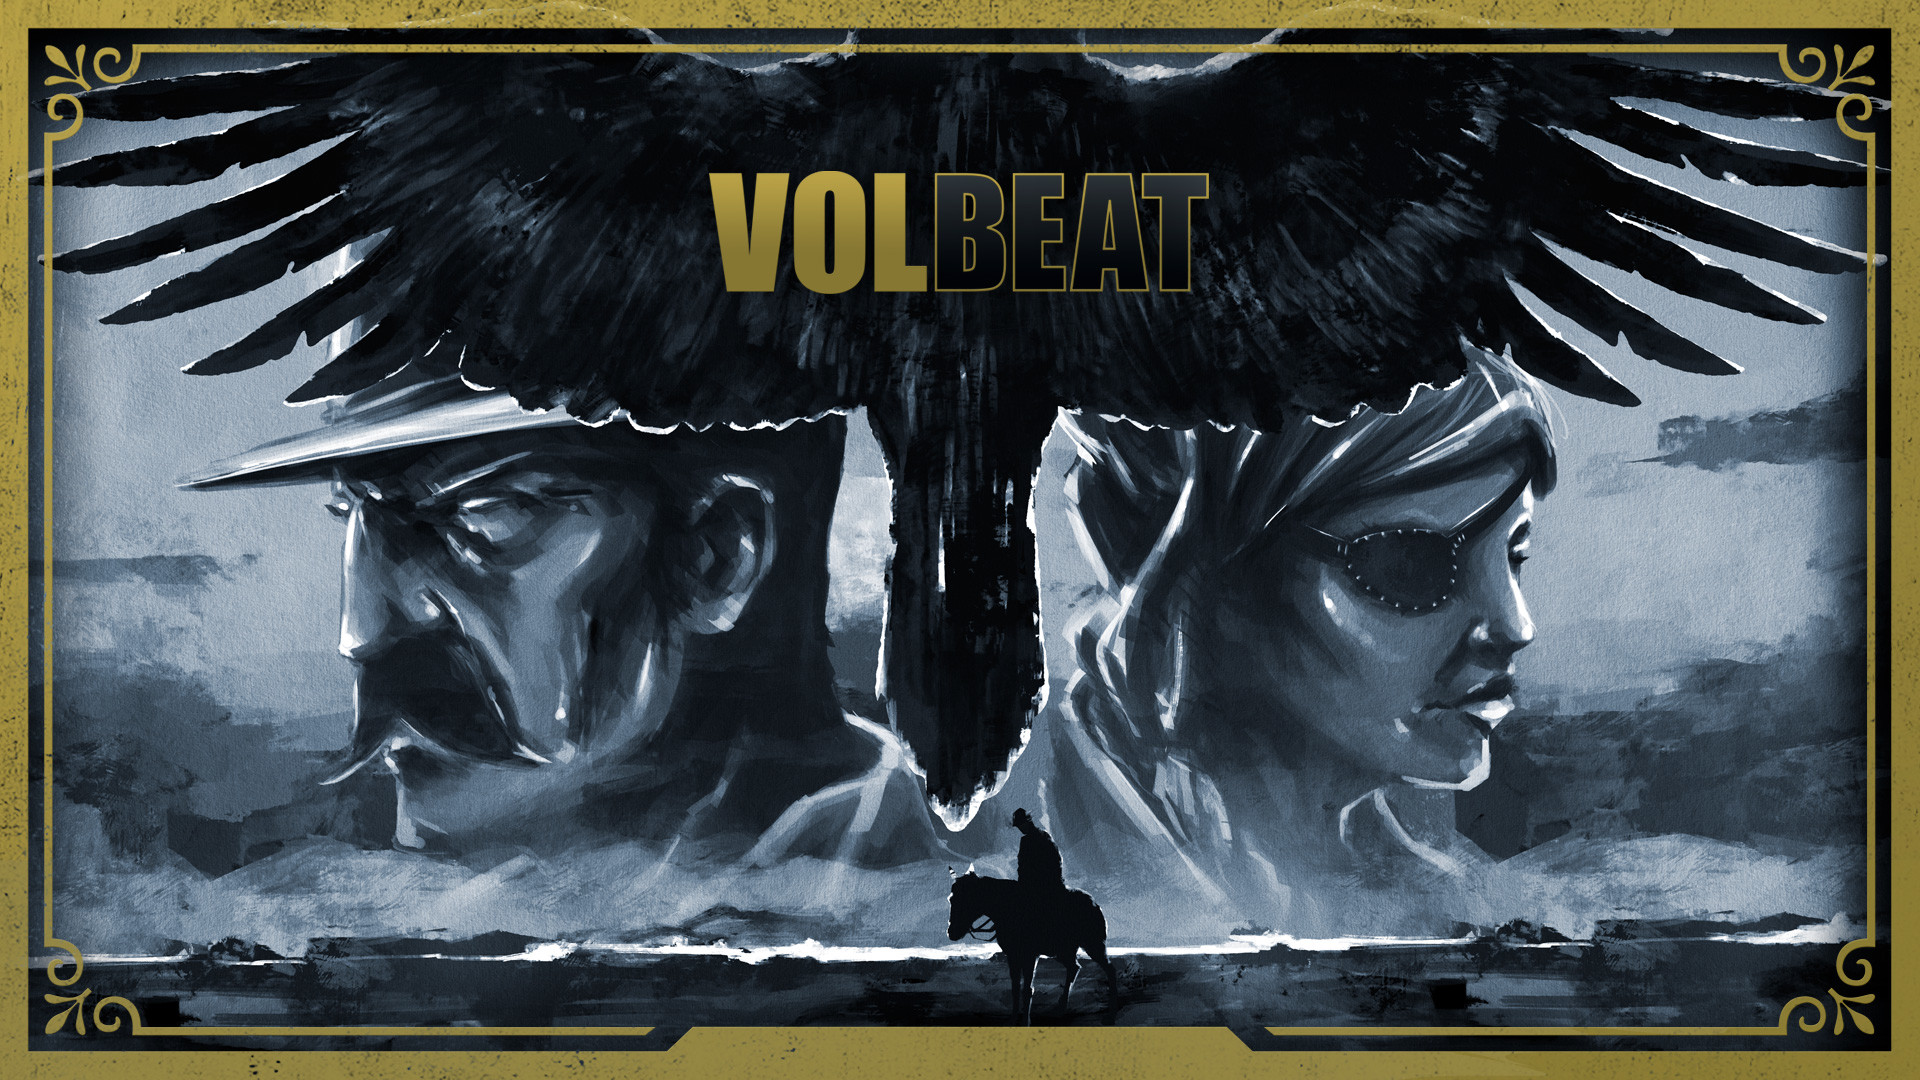 1920x1080 Volbeat images outlaw gentlemen HD wallpaper and background photos